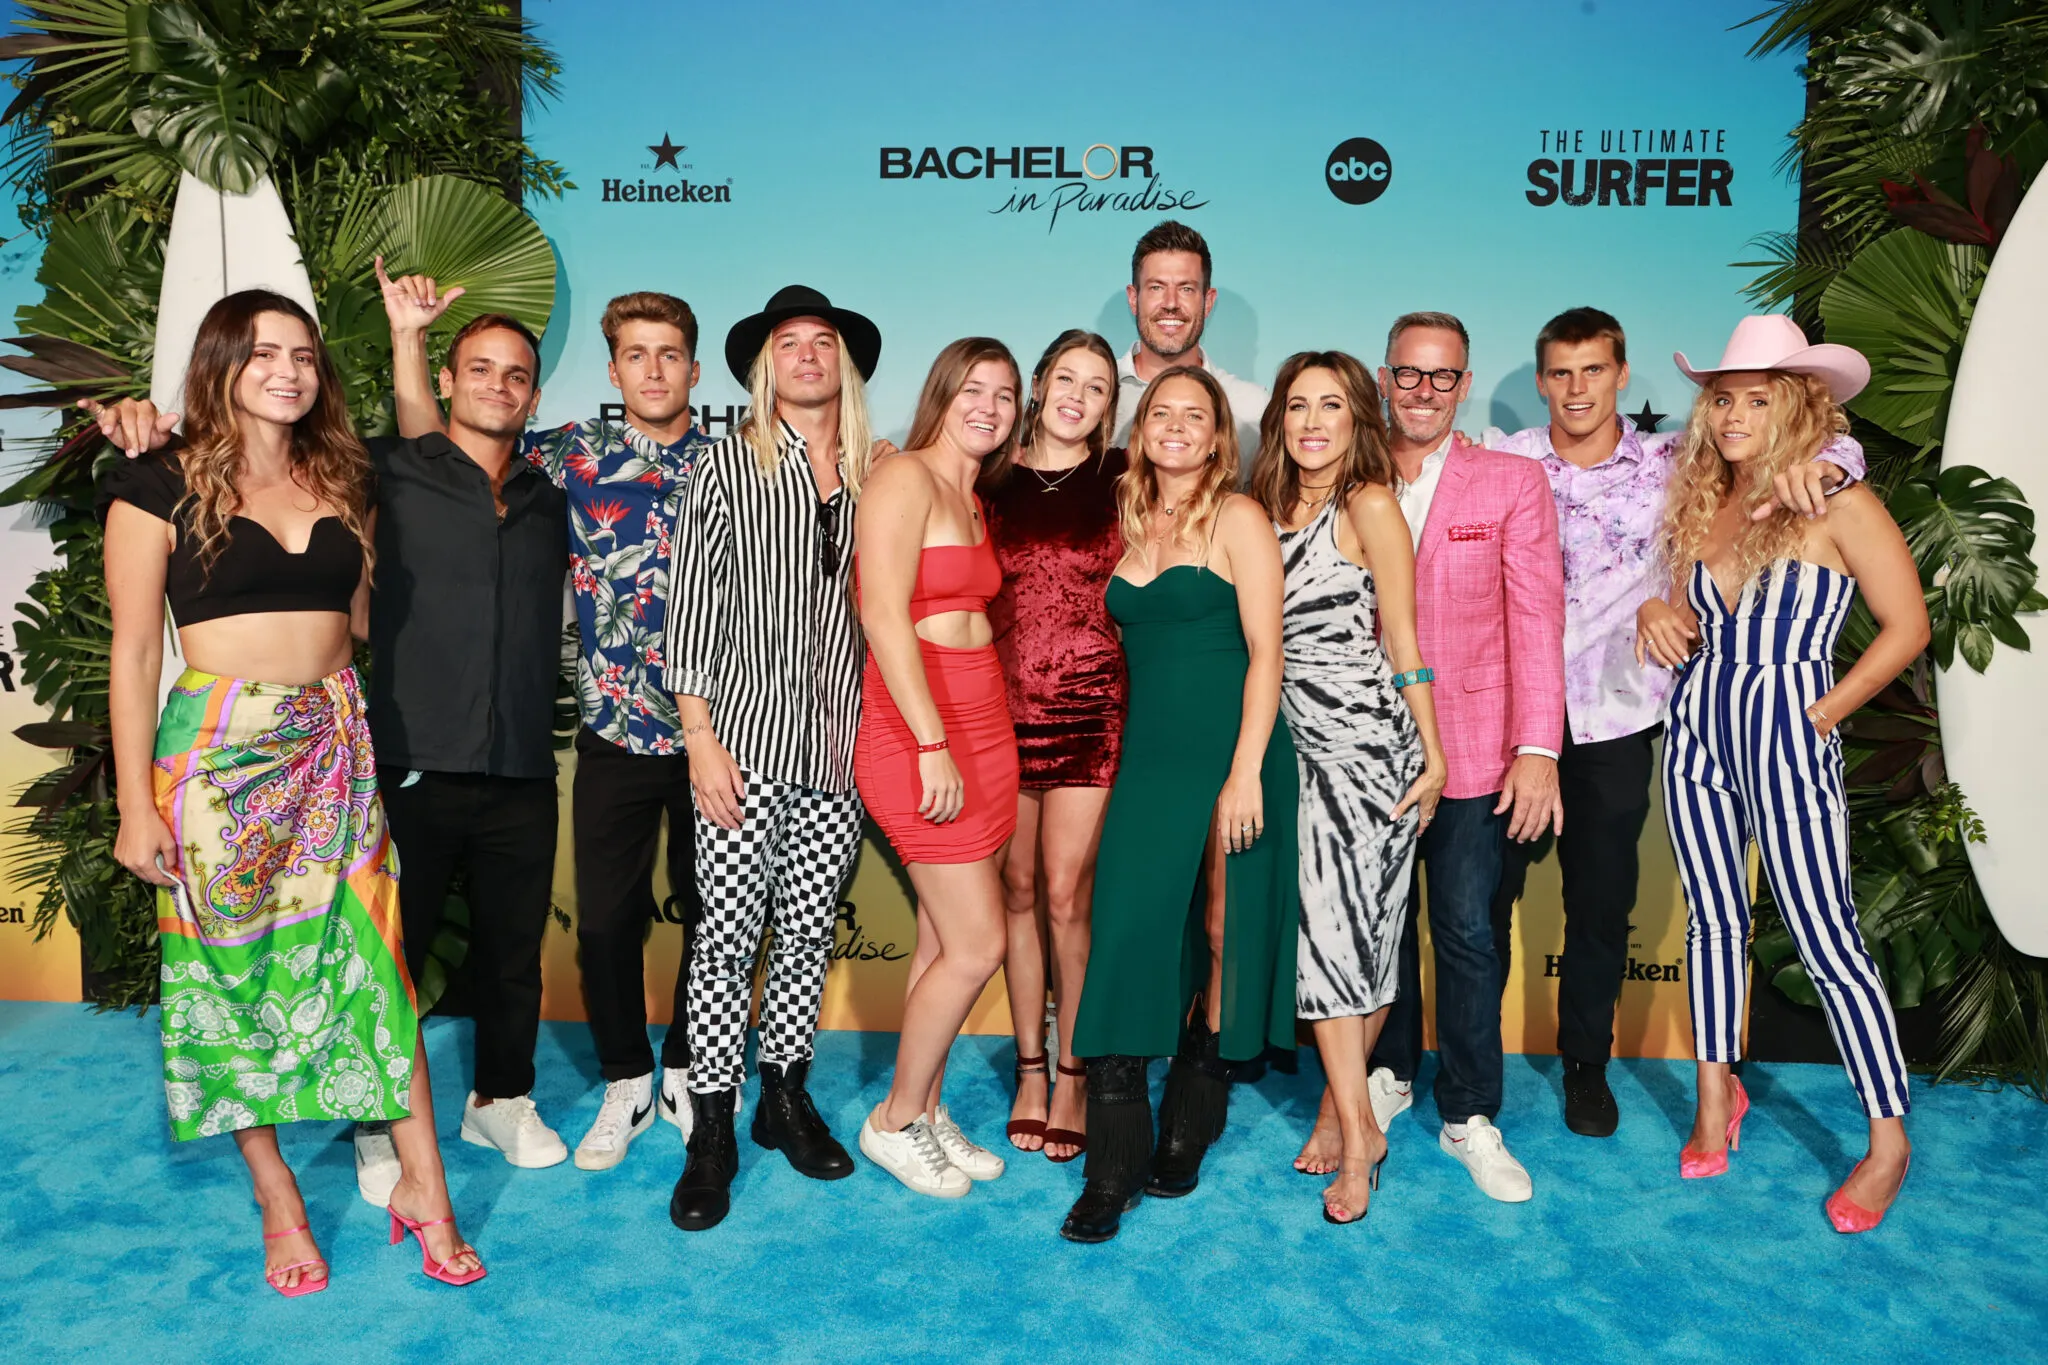 Is 'Bachelor in Paradise' on tonight? Every 'Bachelor in Paradise